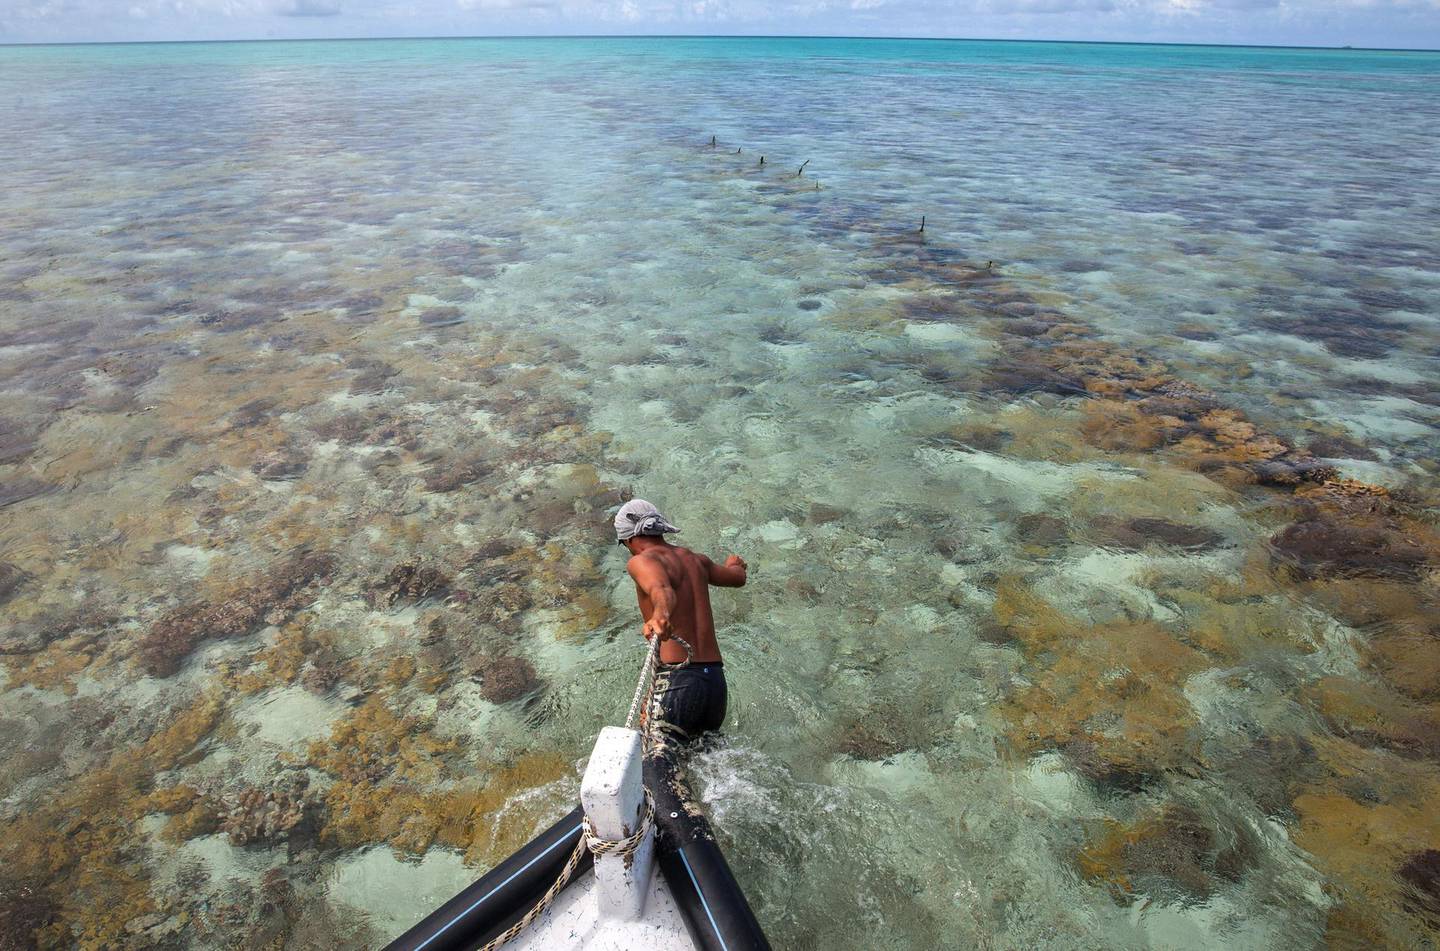 A man pulls a boat off the Toau atoll, about 400 kilometres (250 miles) from Tahiti in the Tuamotu Archipelago in the French polynesia, on October 14, 2015. AFP PHOTO / GREGORY BOISSY / AFP PHOTO / GREGORY BOISSY